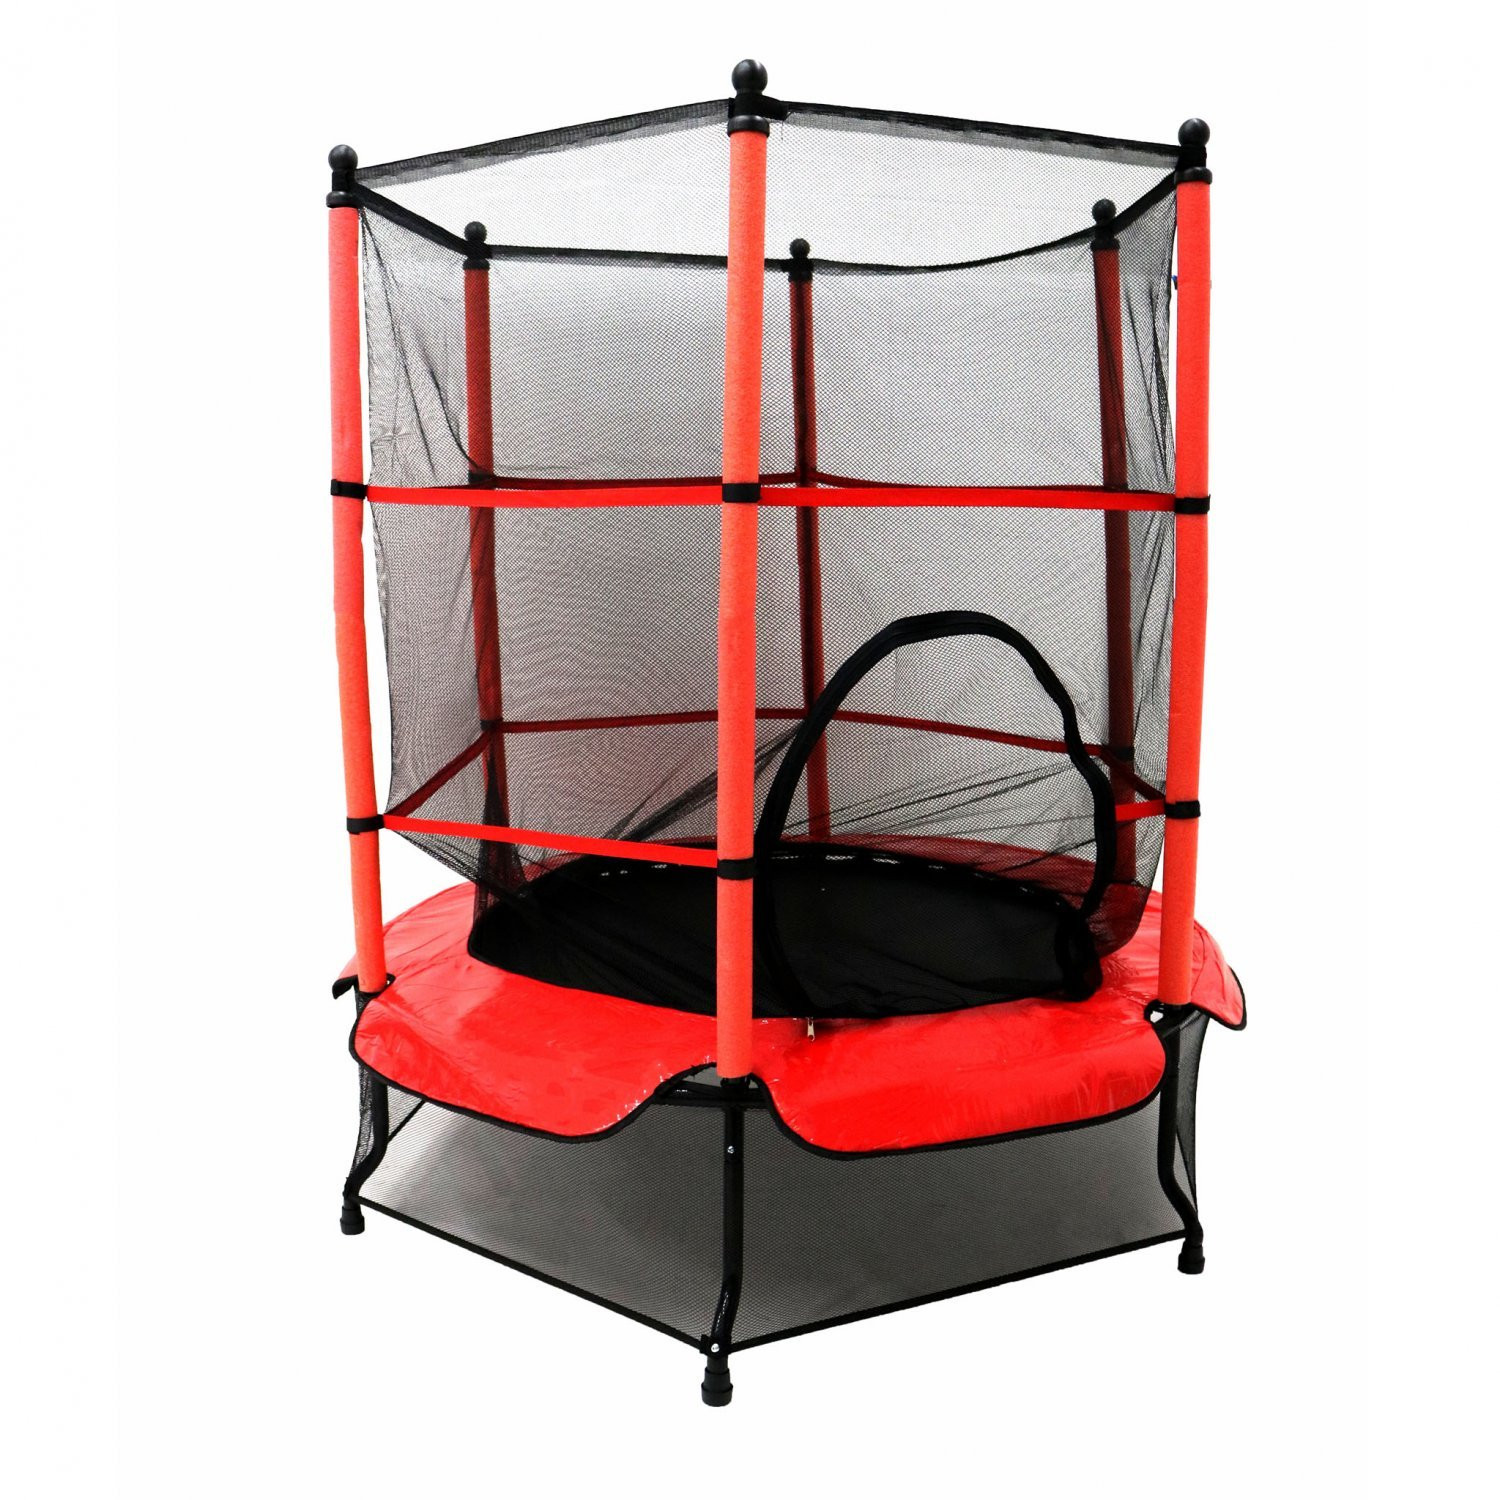 Outdoor Trampoline For Kids
 55" Kids Trampoline with Safety Net and Red Cover Garden